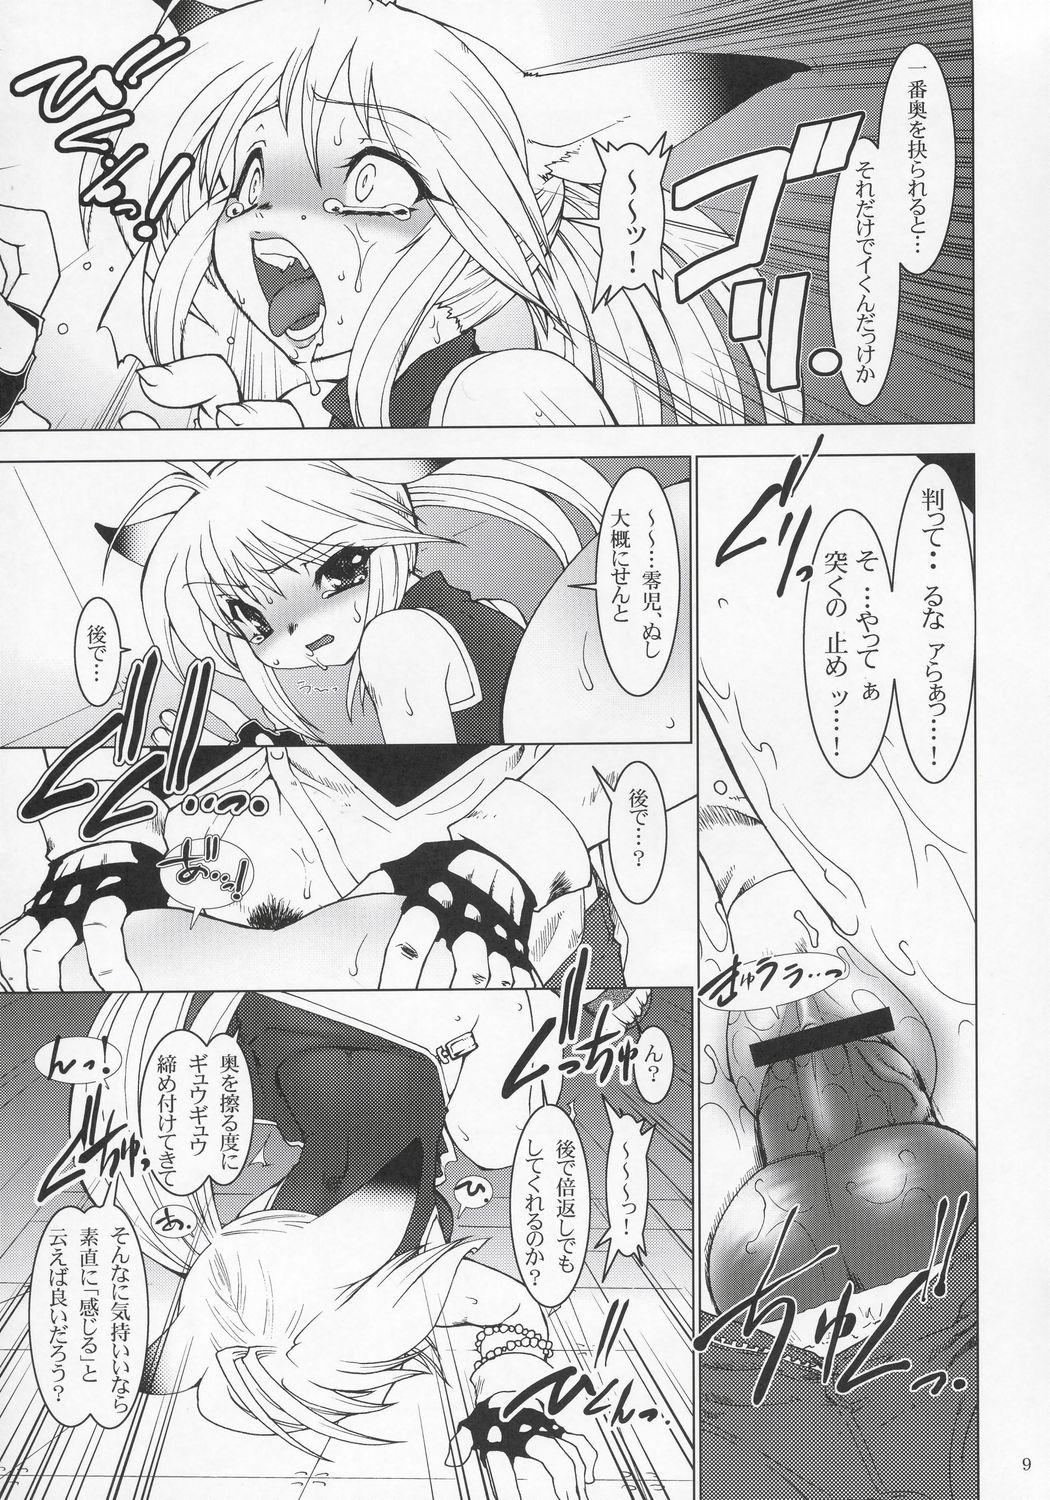 Gay Money NxC - Endless frontier Valkyrie no bouken Blackcock - Page 8